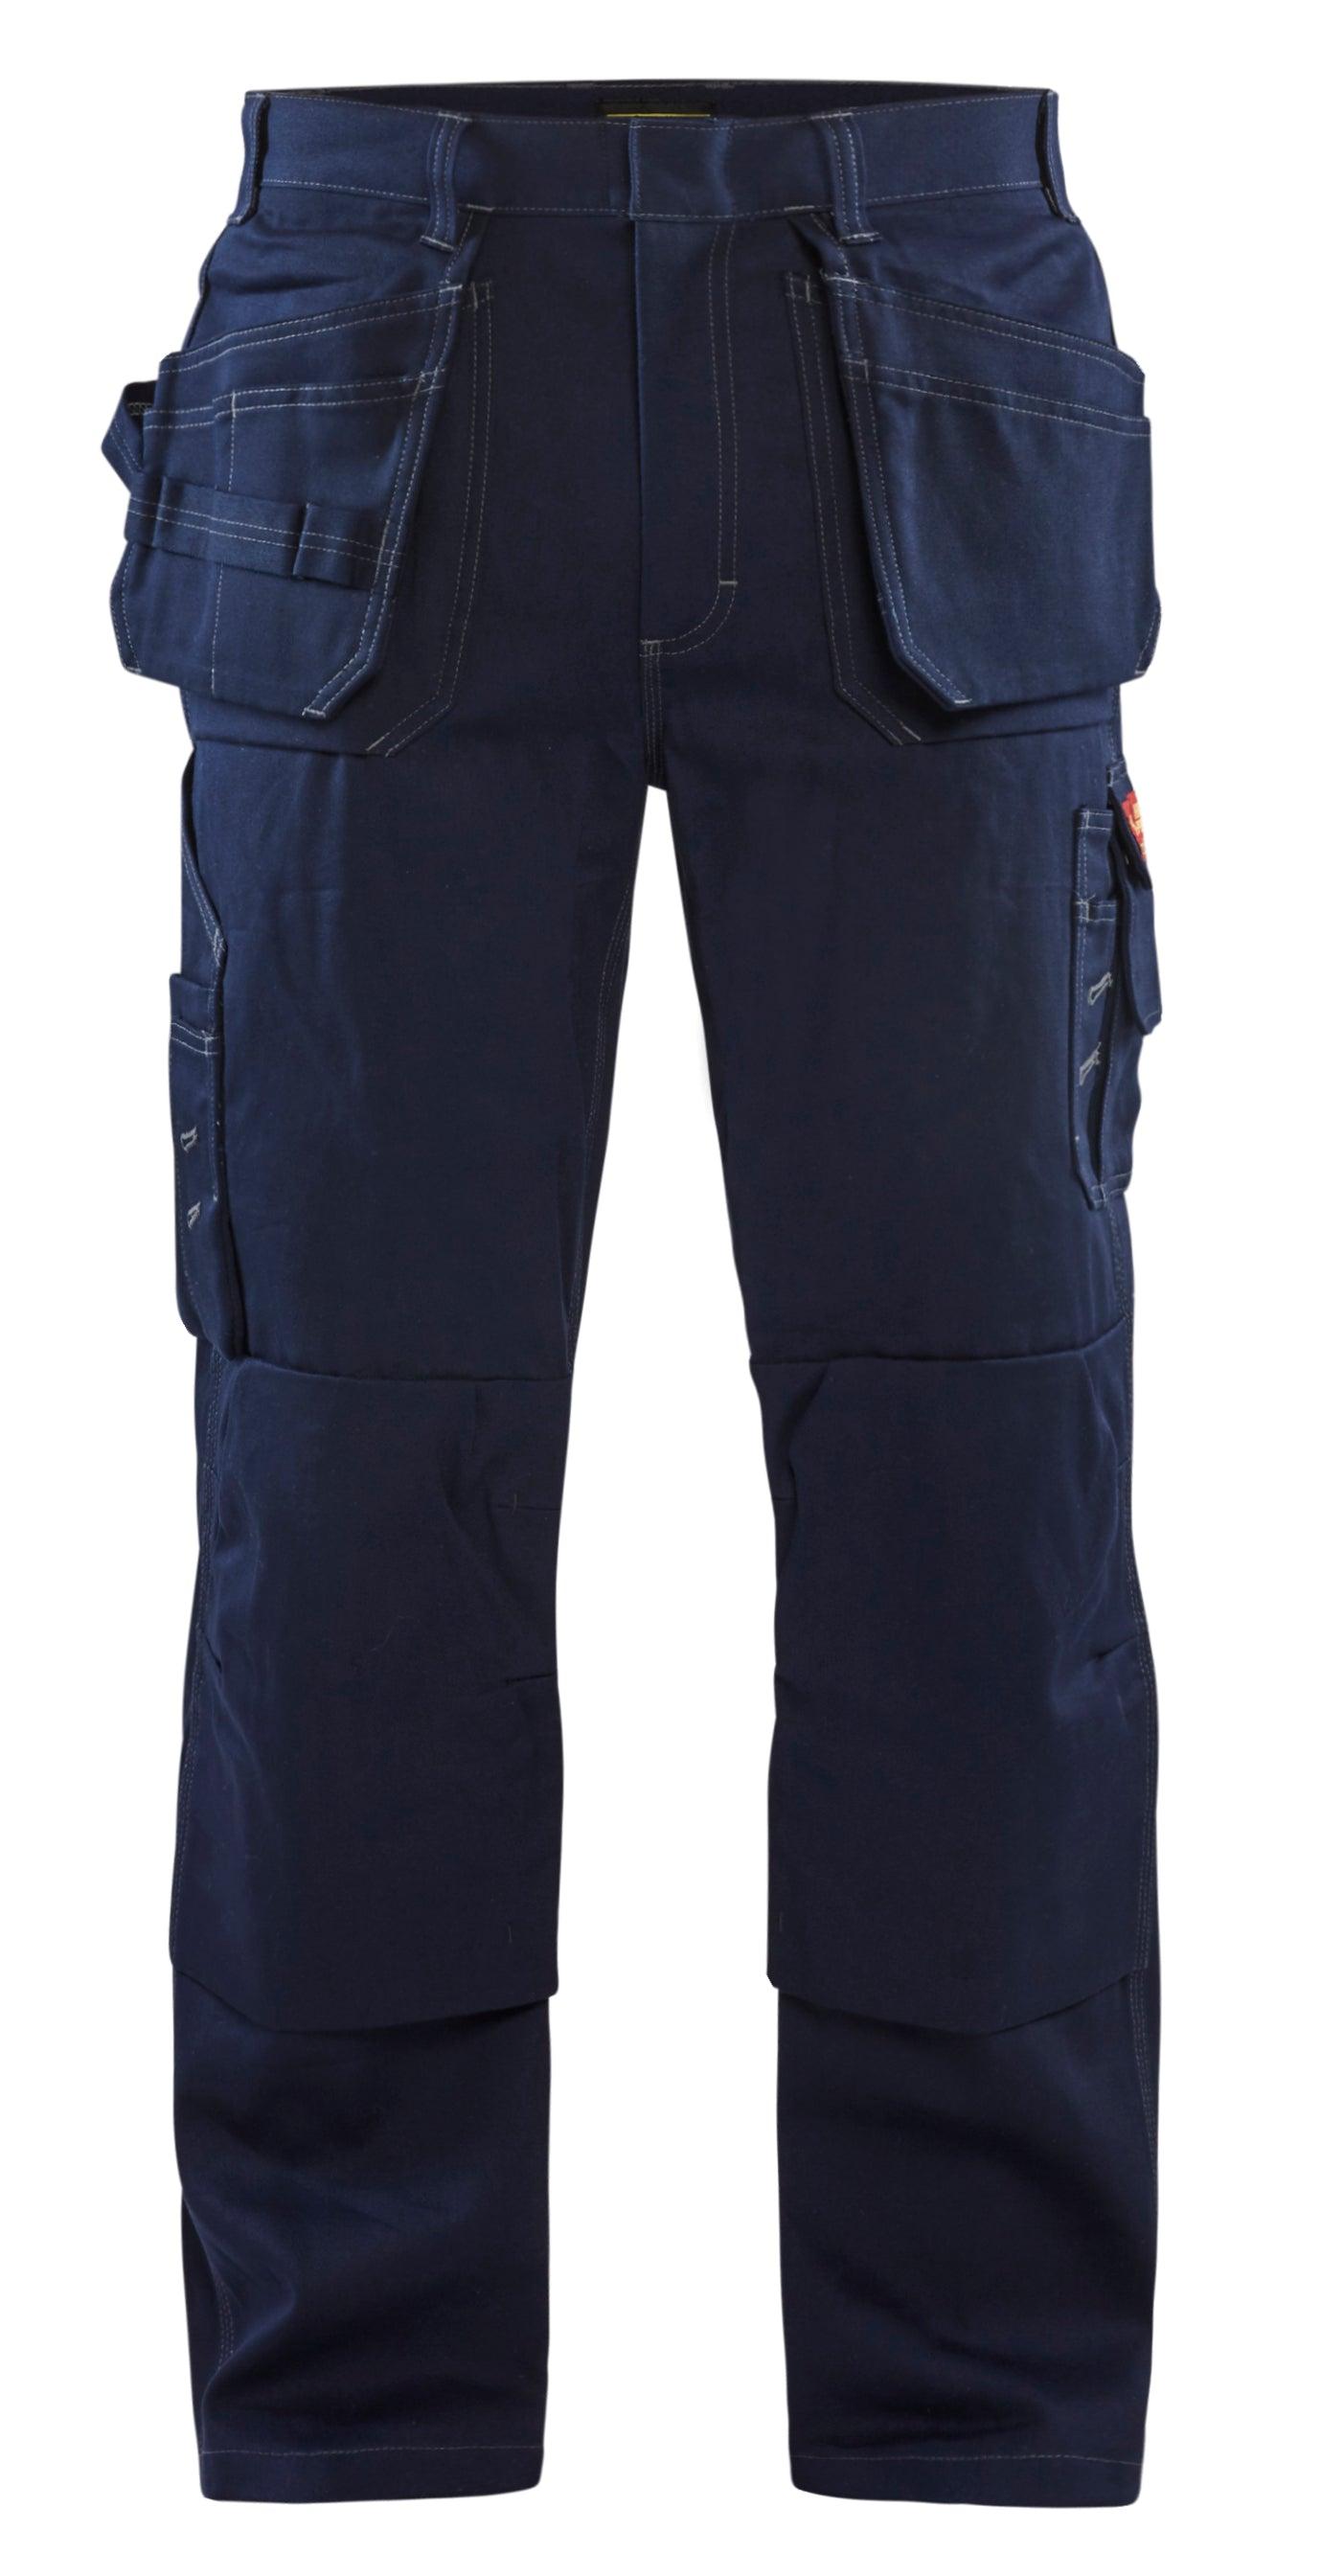 Blaklader 1636 10oz Flame Resistant Work Pants with Utility Pockets - Navy Blue - Trusted Gear Company LLC